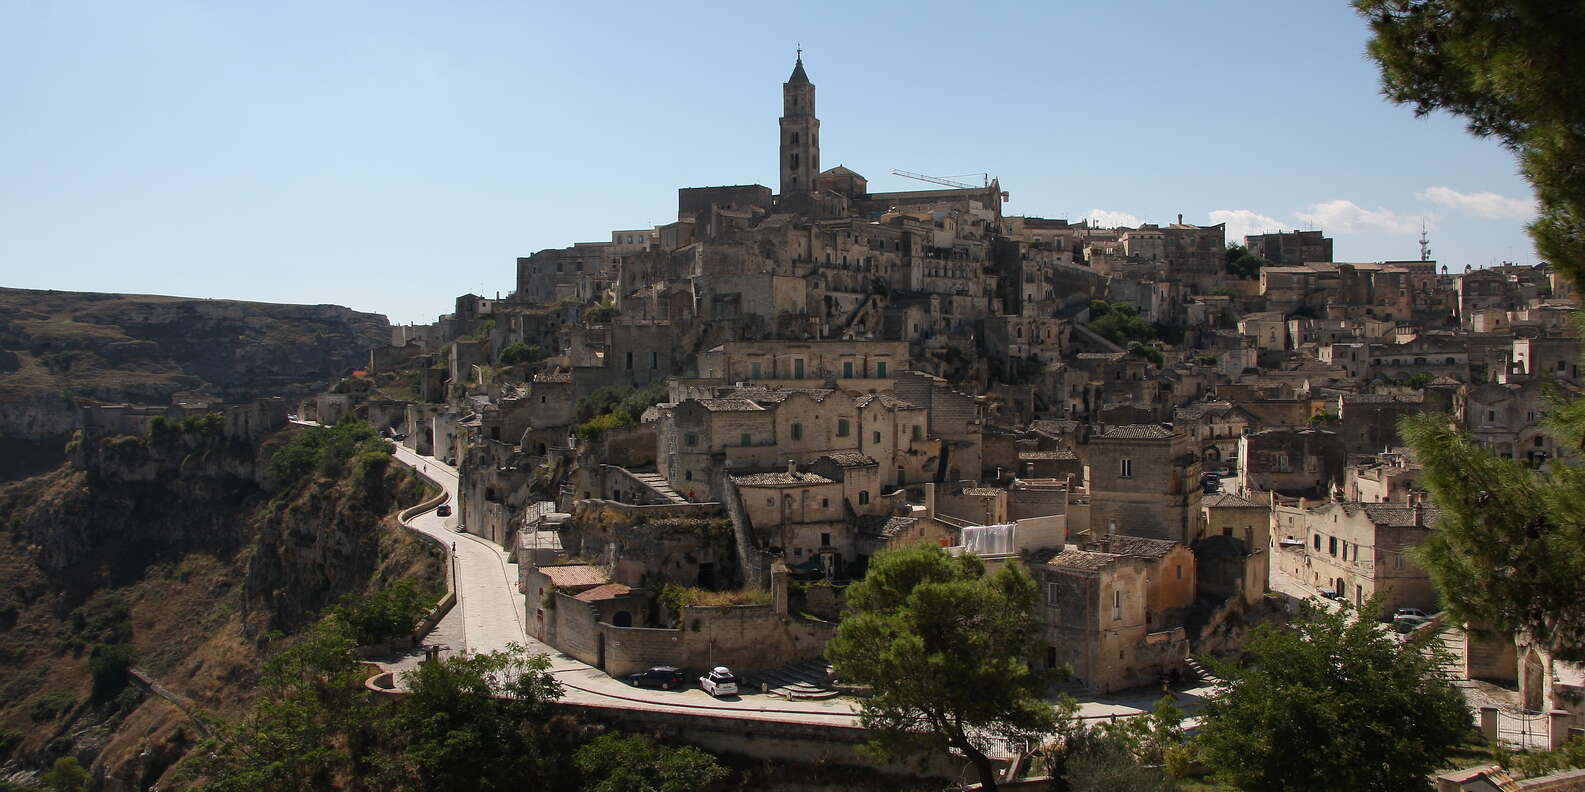 best things to do in Matera